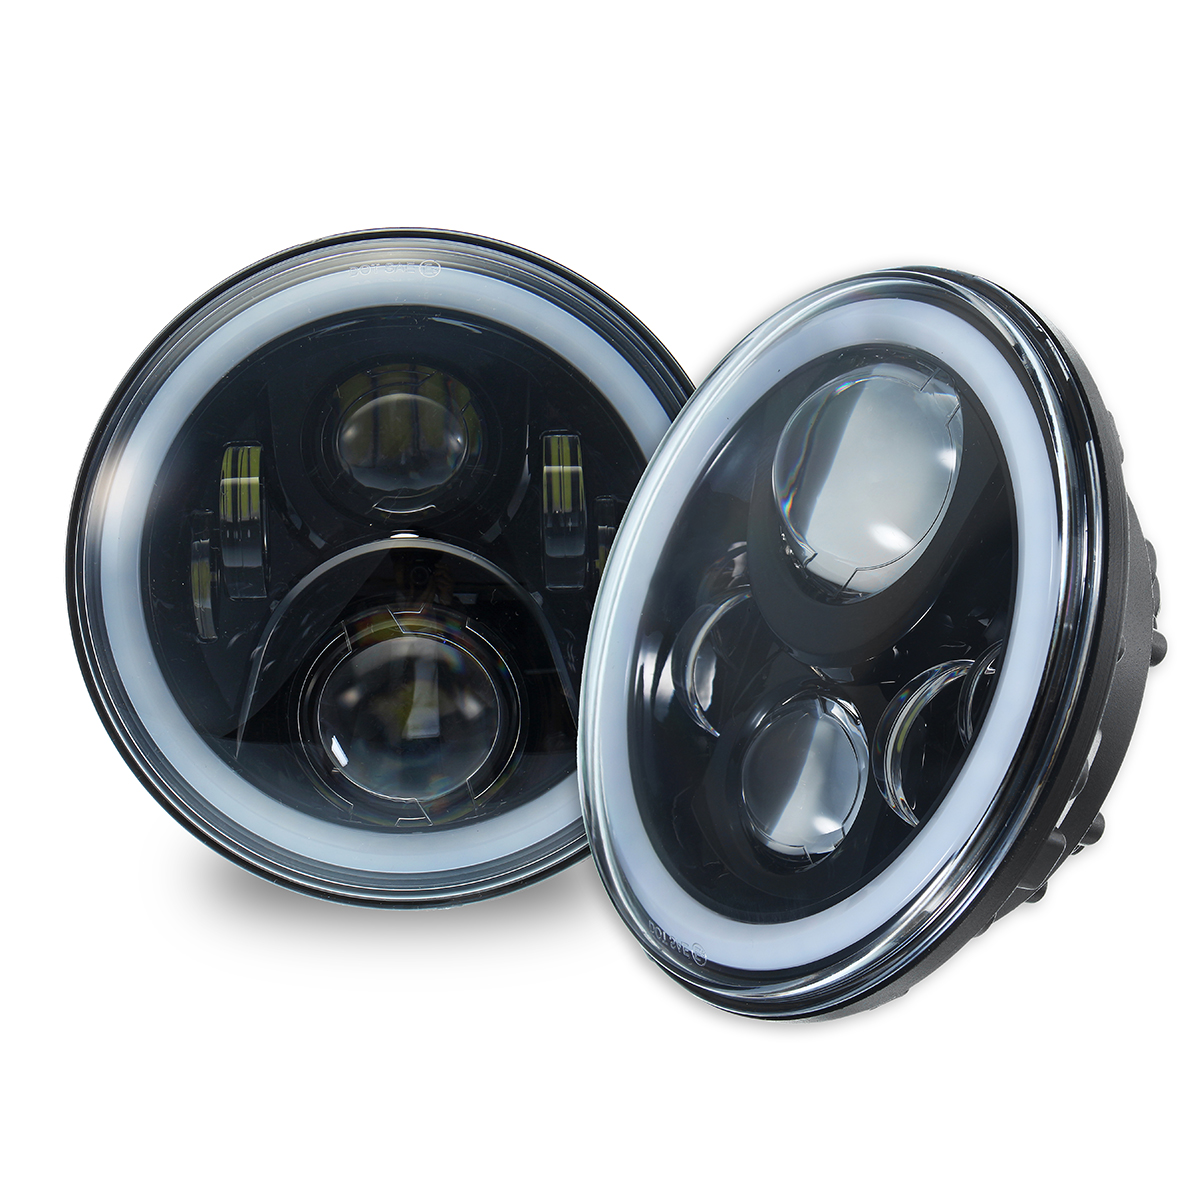 Pair 7 Inch 19 RGB LED Car Headlights IP67 Built-In Lamp Automatic Change Halo Angel Eyes for the Jeep Wrangler Landrover Defender Hummer